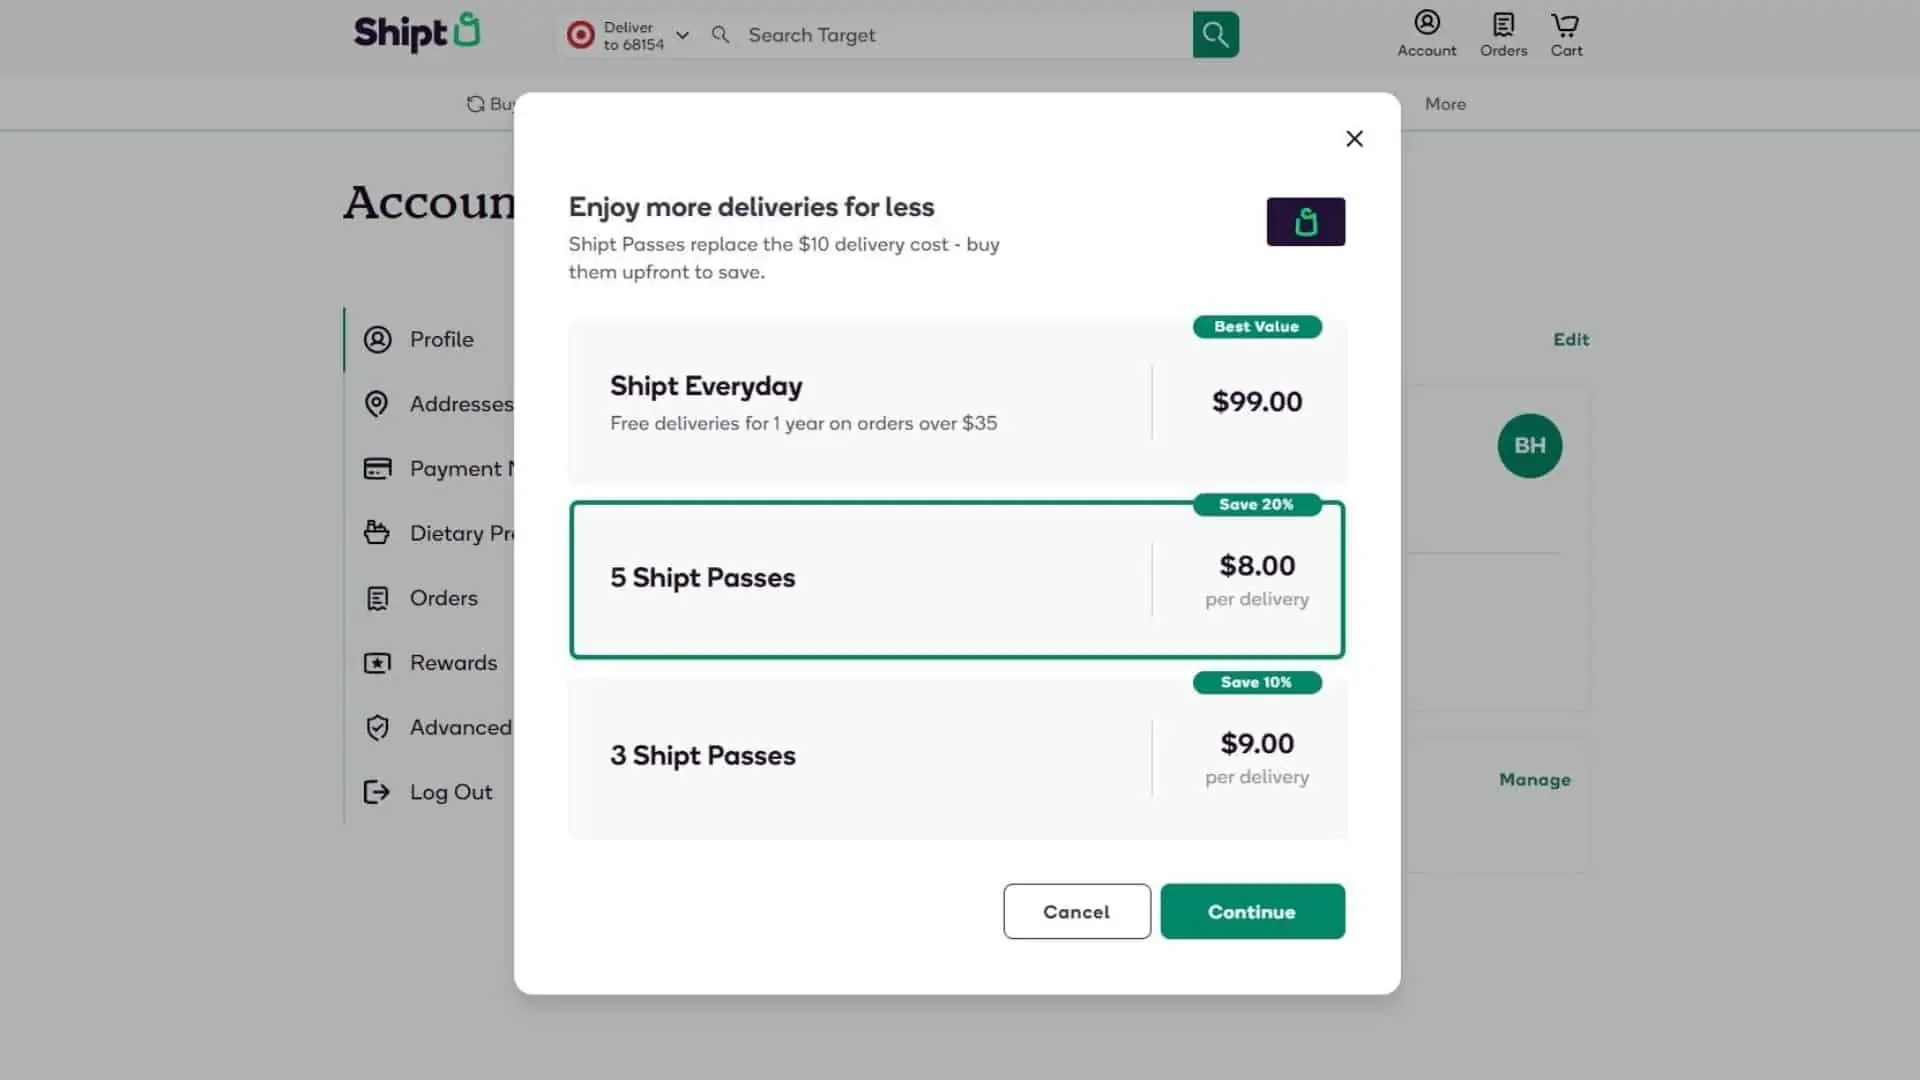 Shipt pass pricing screenshot - how to save on Shipt delivery